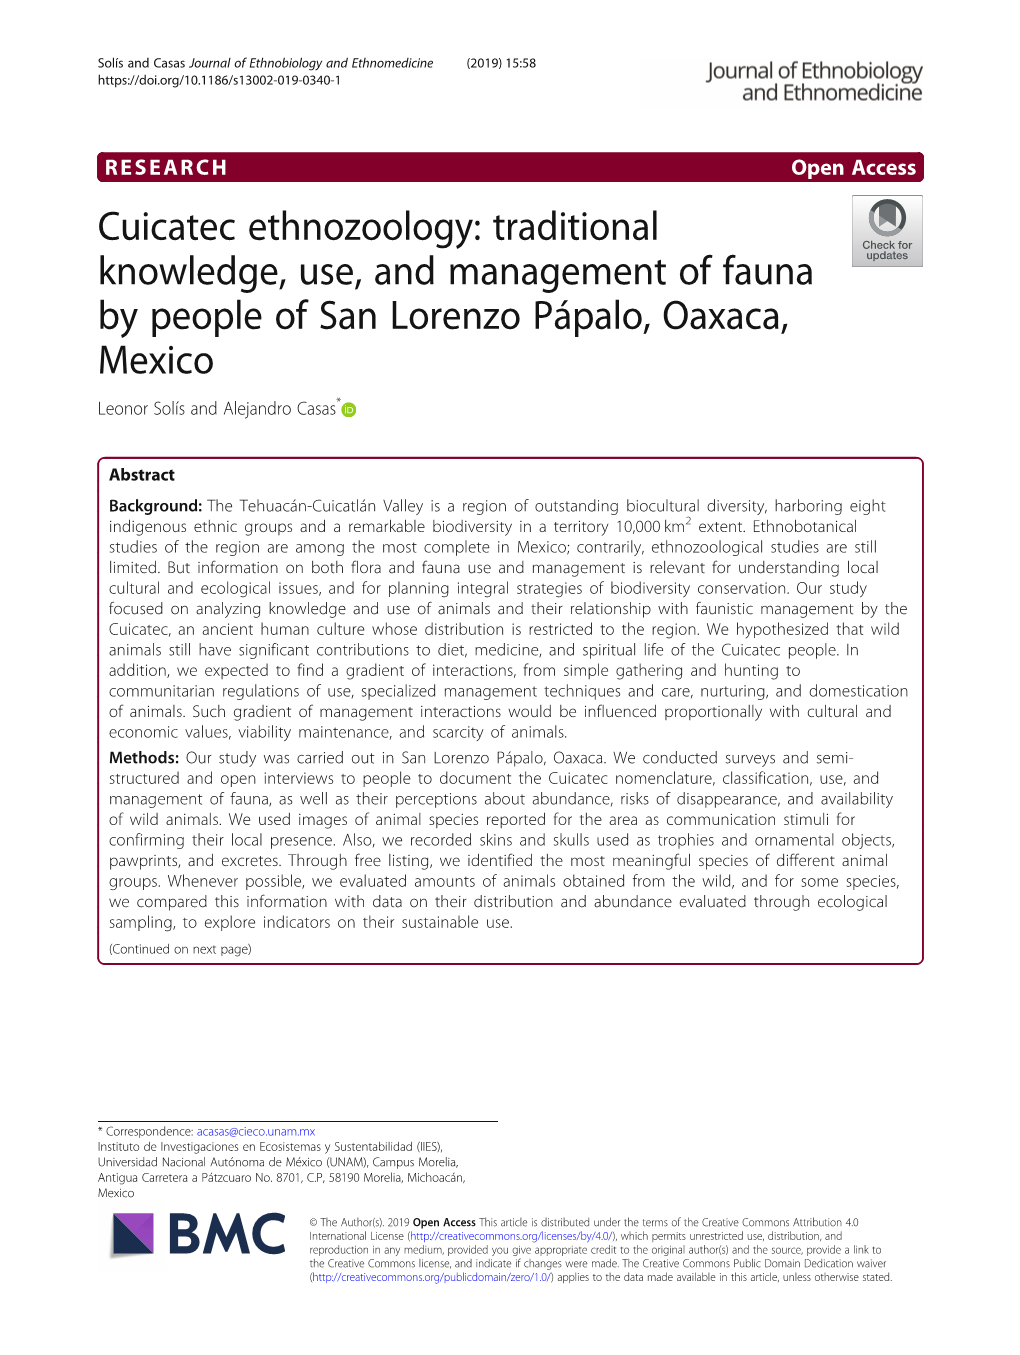 Cuicatec Ethnozoology: Traditional Knowledge, Use, and Management of Fauna by People of San Lorenzo Pápalo, Oaxaca, Mexico Leonor Solís and Alejandro Casas*